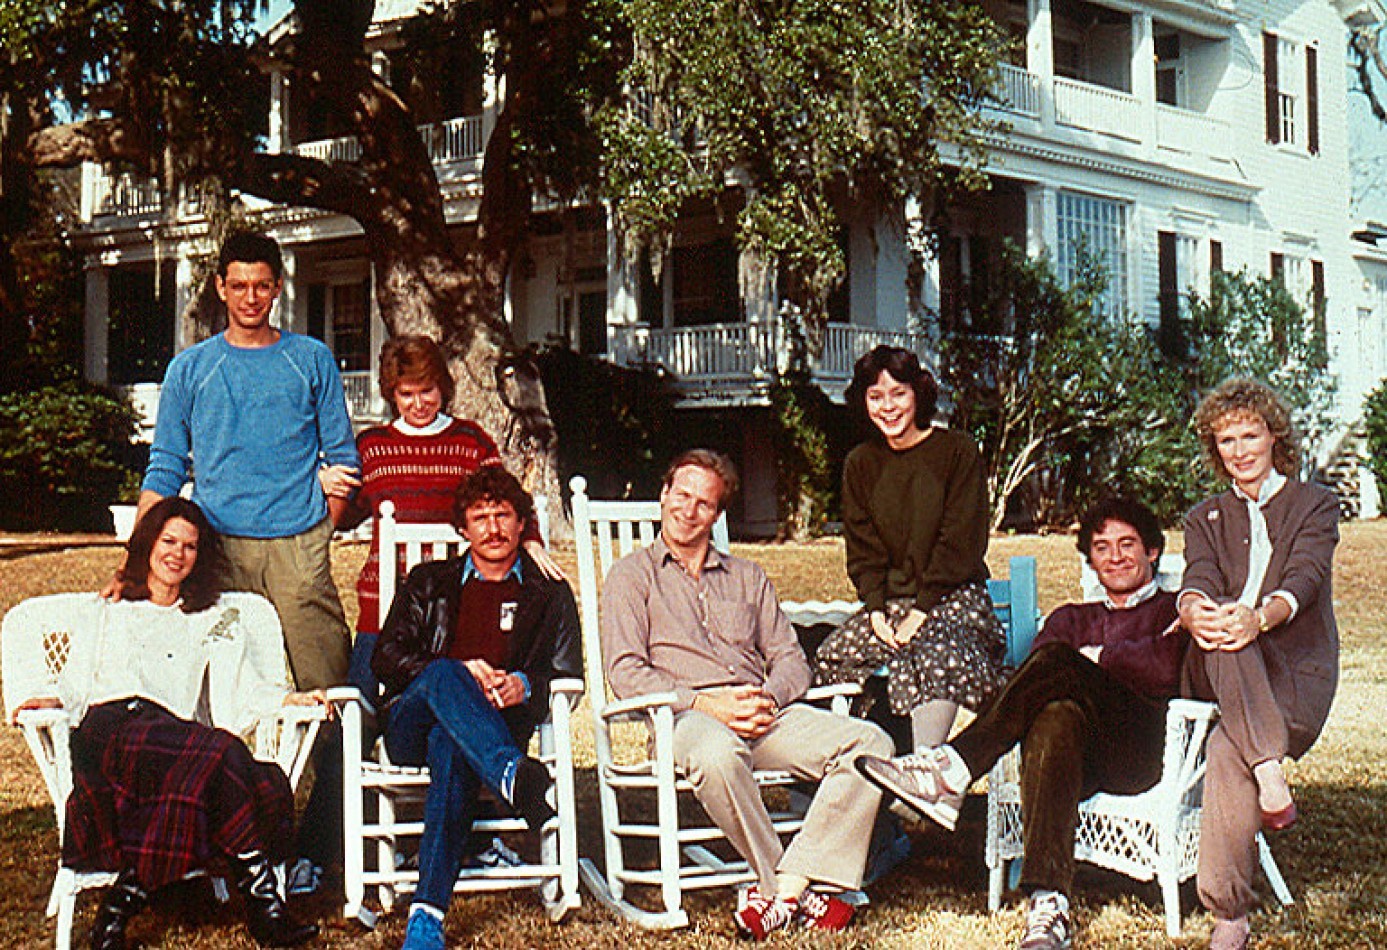 In 1983, Tidalholm was the setting of the film The Big Chill, with an all star cast including glenn close, Kevin Klein, Jeff Goldblum, William Hurt and Tom Berenger.